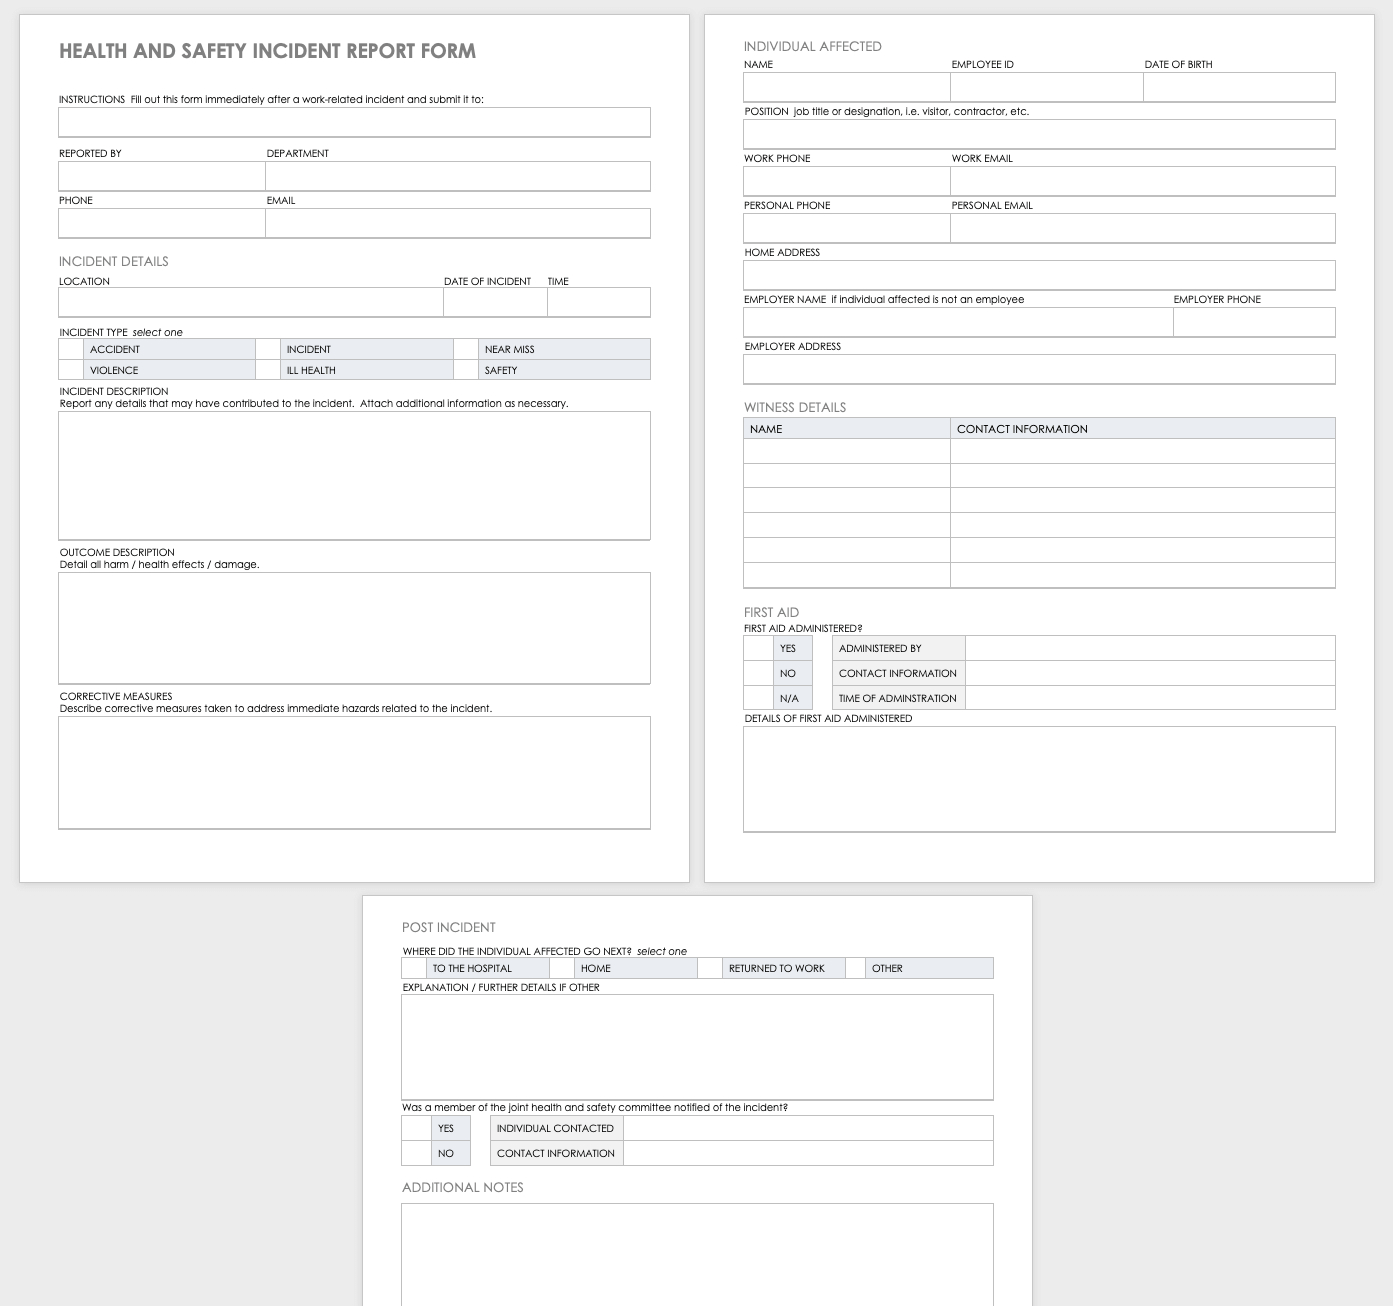 Free Workplace Accident Report Templates | Smartsheet With Health And Safety Incident Report Form Template